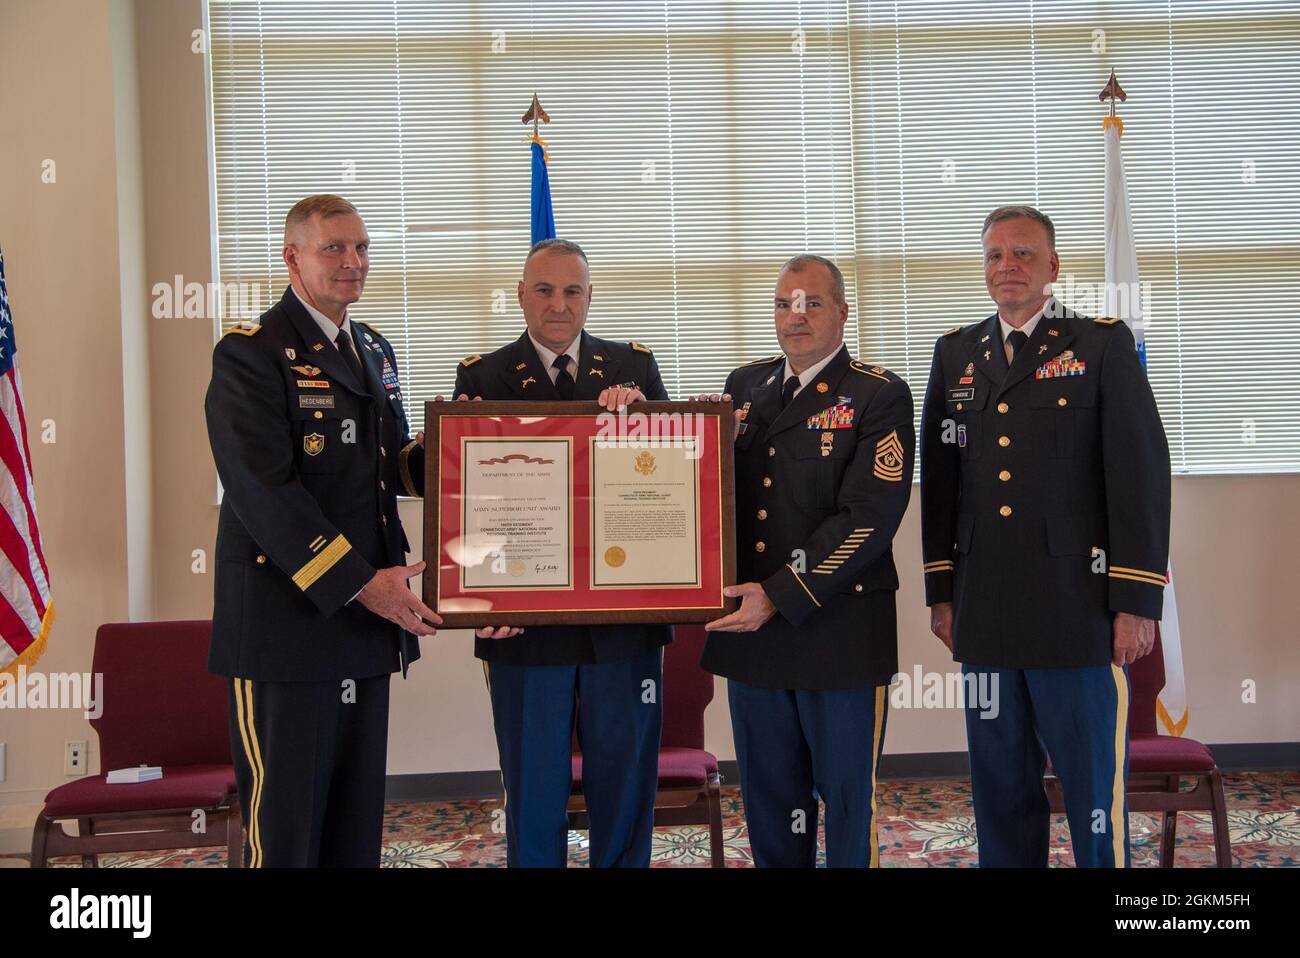 Brigadier Gen. Ralph Hedenberg (left), director of the Connecticut National Guard joint staff, presents the Army Superior Unit Award to Col. L.J. Fusaro and Command Sgt. Maj. Paul Vicinus, commander and senior enlisted advisor, respectively, for the 169th Regiment (Regional Training Institute) during a ceremony at Camp Nett in Niantic, Conn. May 22, 2021. The regiment earned the award between April 1, 2016 and March 31, 2017 by achieving the highest rating possible and no negative remarks on any of the 28 specific accreditation-based functional areas of its triennial accreditation, developing Stock Photo